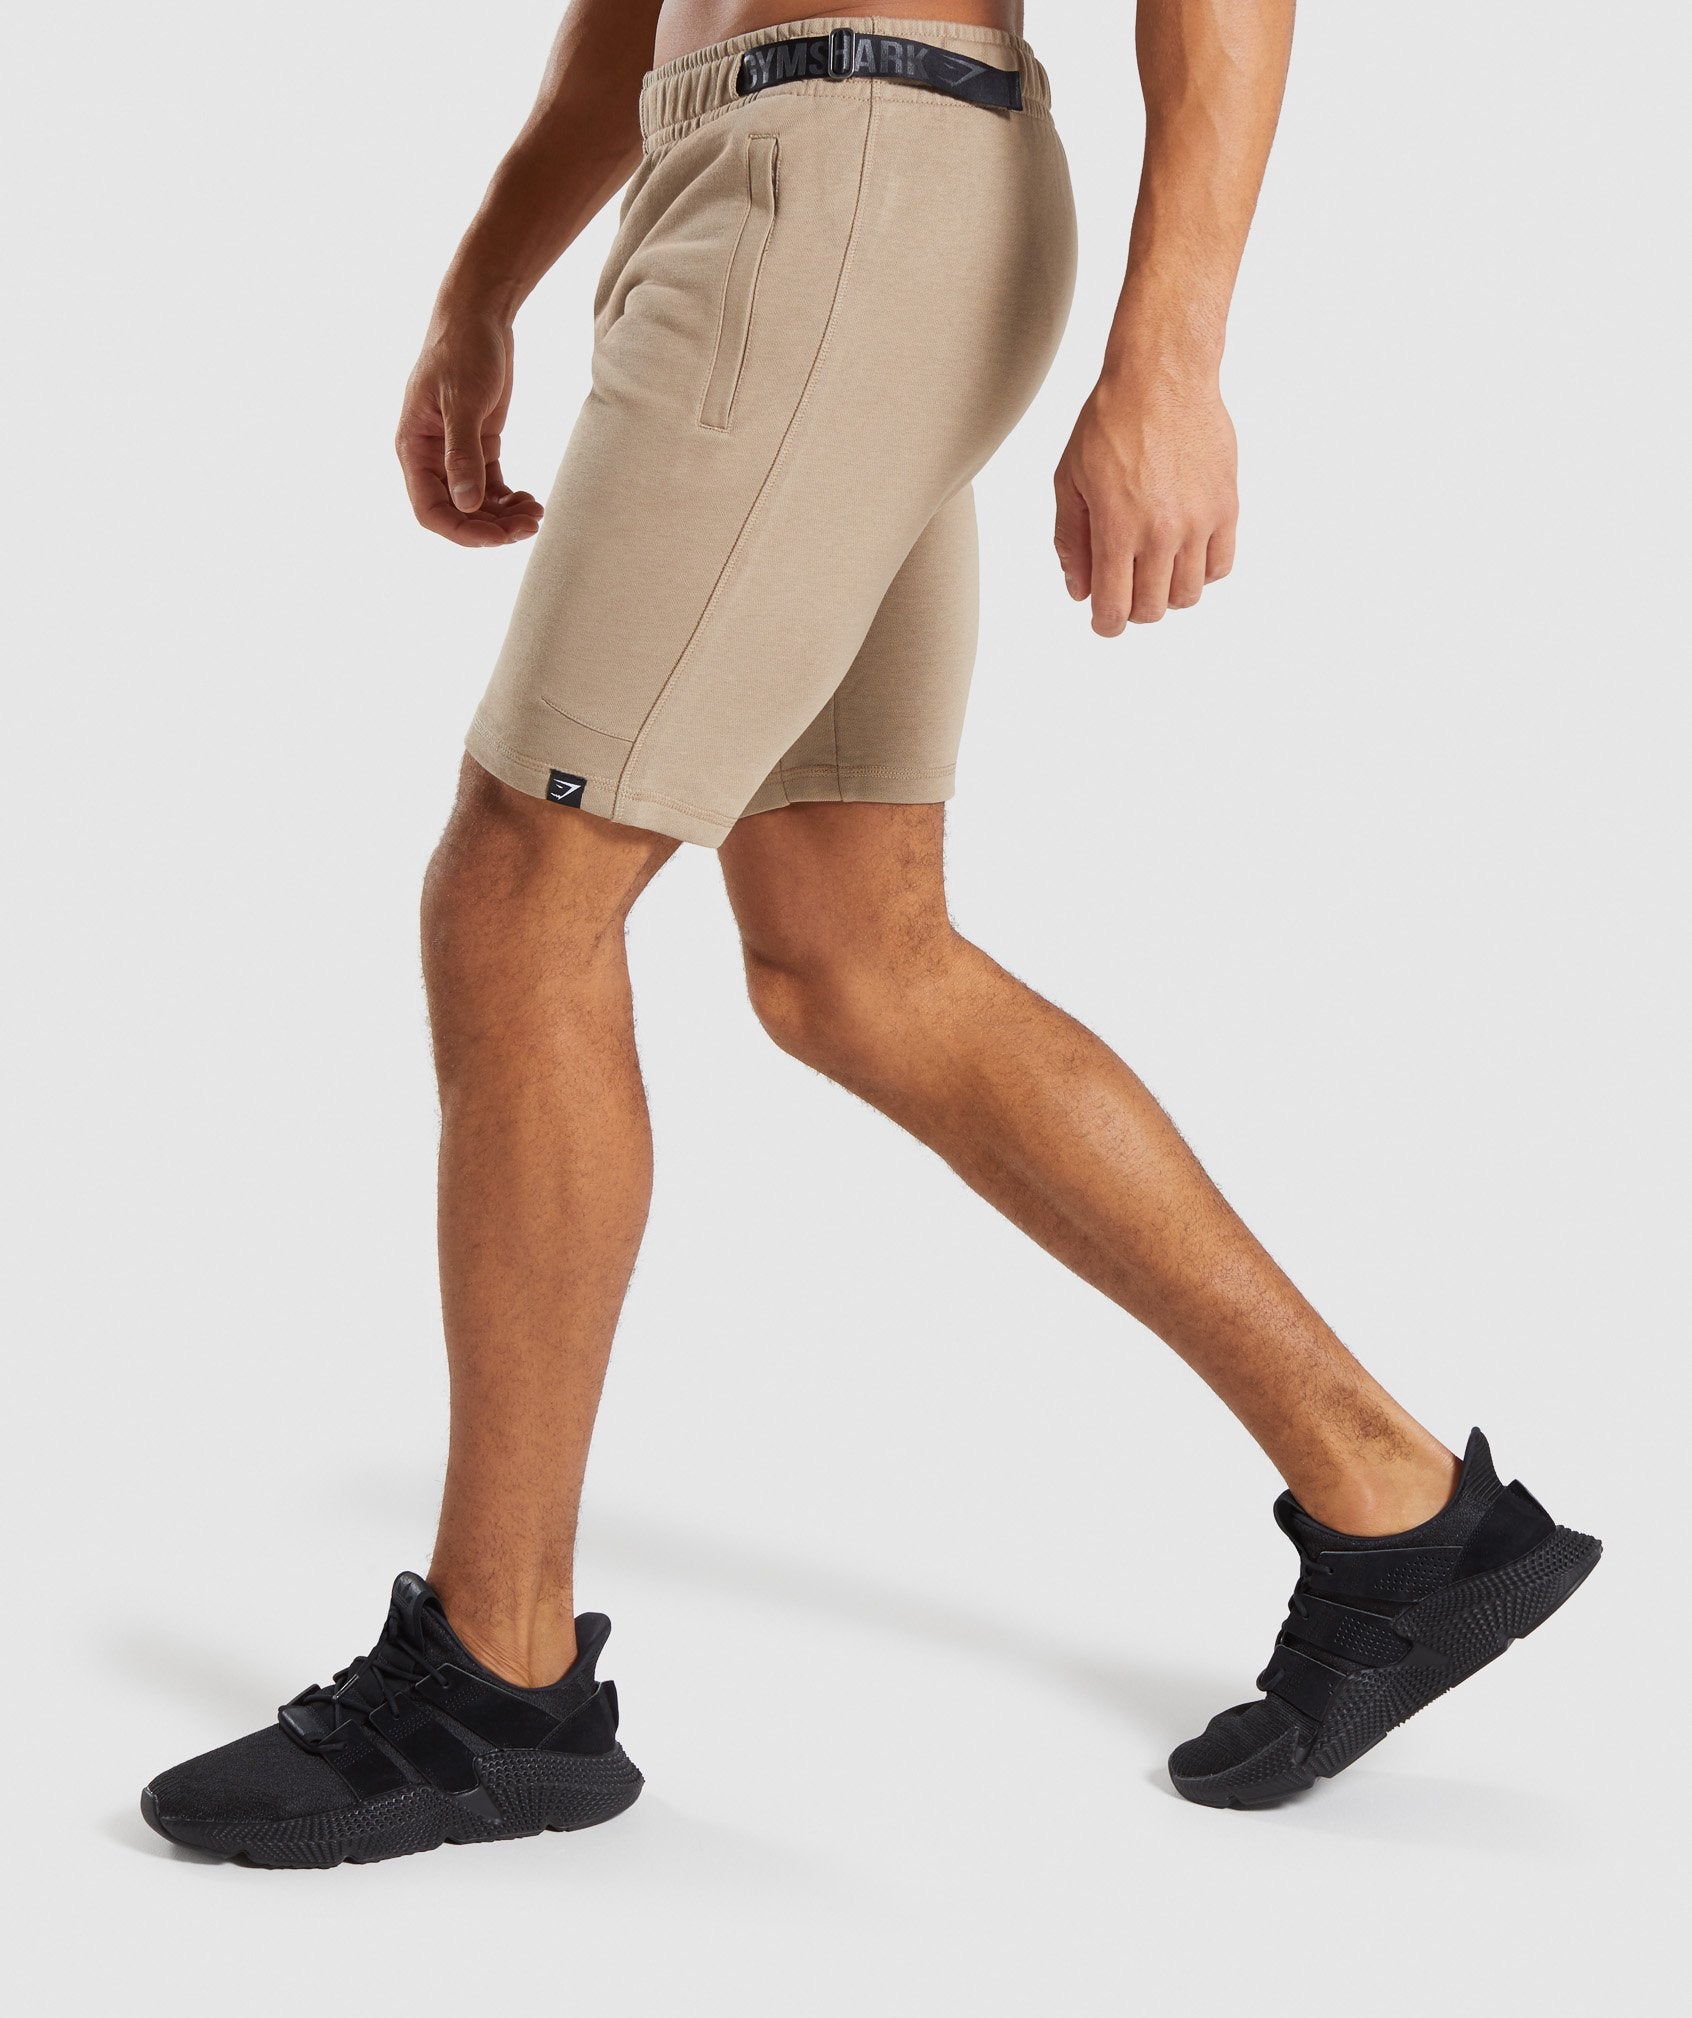 Carbon Shorts in Driftwood Brown - view 3